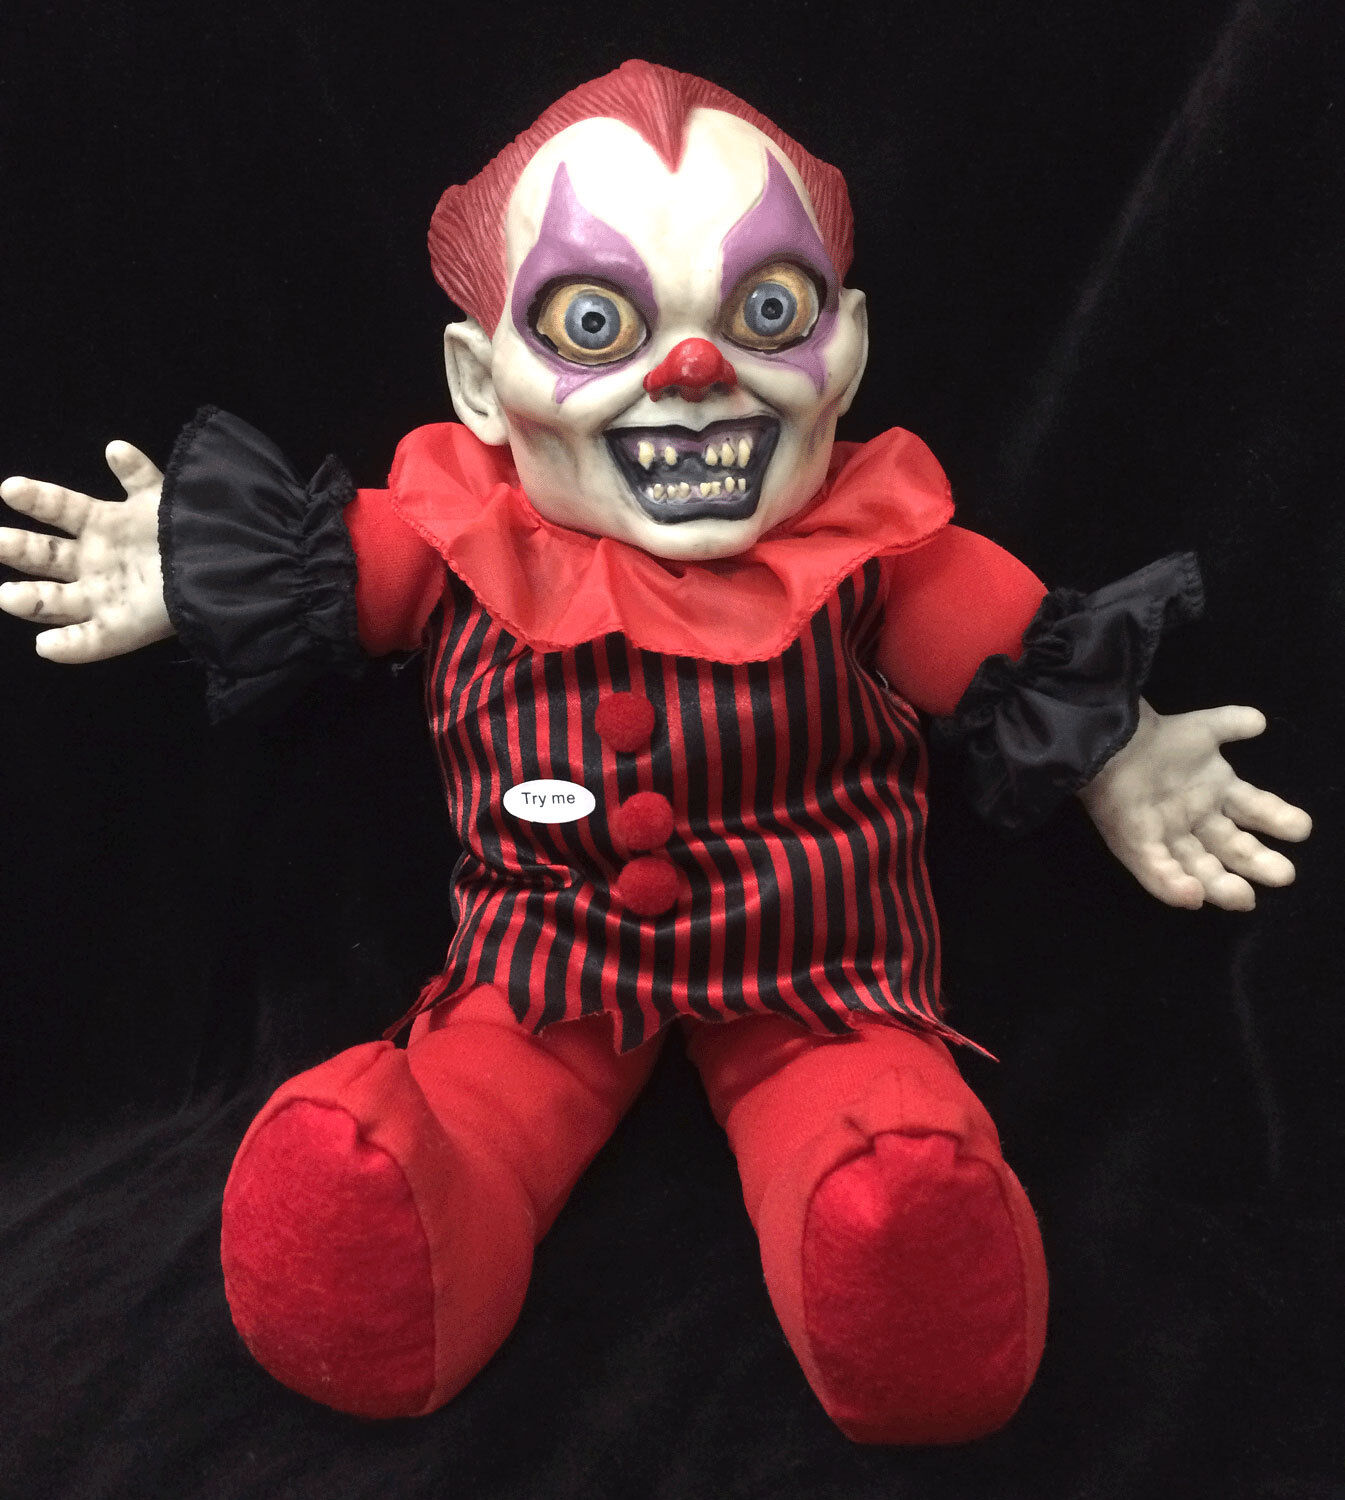 Horror Toy TALKING CREEPY KILLER CLOWN DOLL Scary Haunted House Prop Decoration